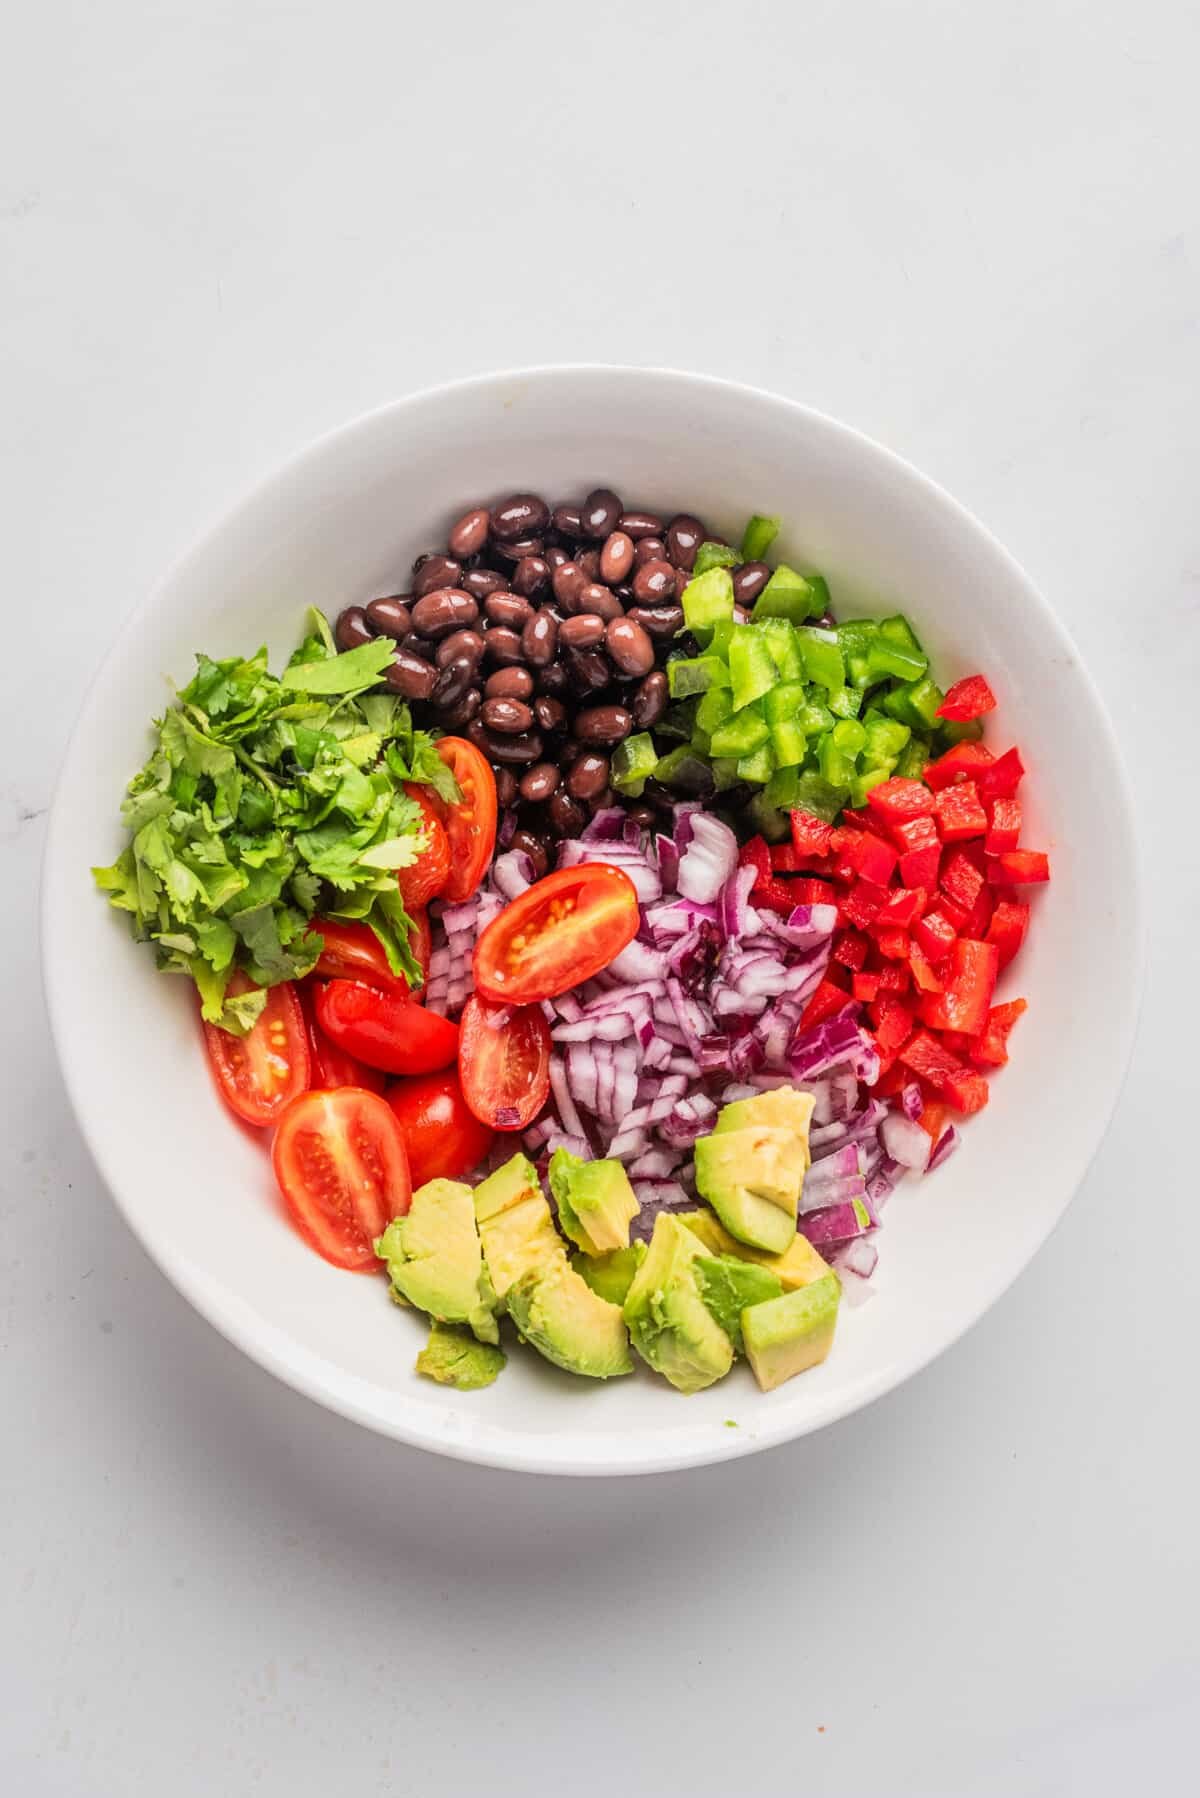 An overhead image of the ingredients of black bean salad together in one bowl, before mixing them together.